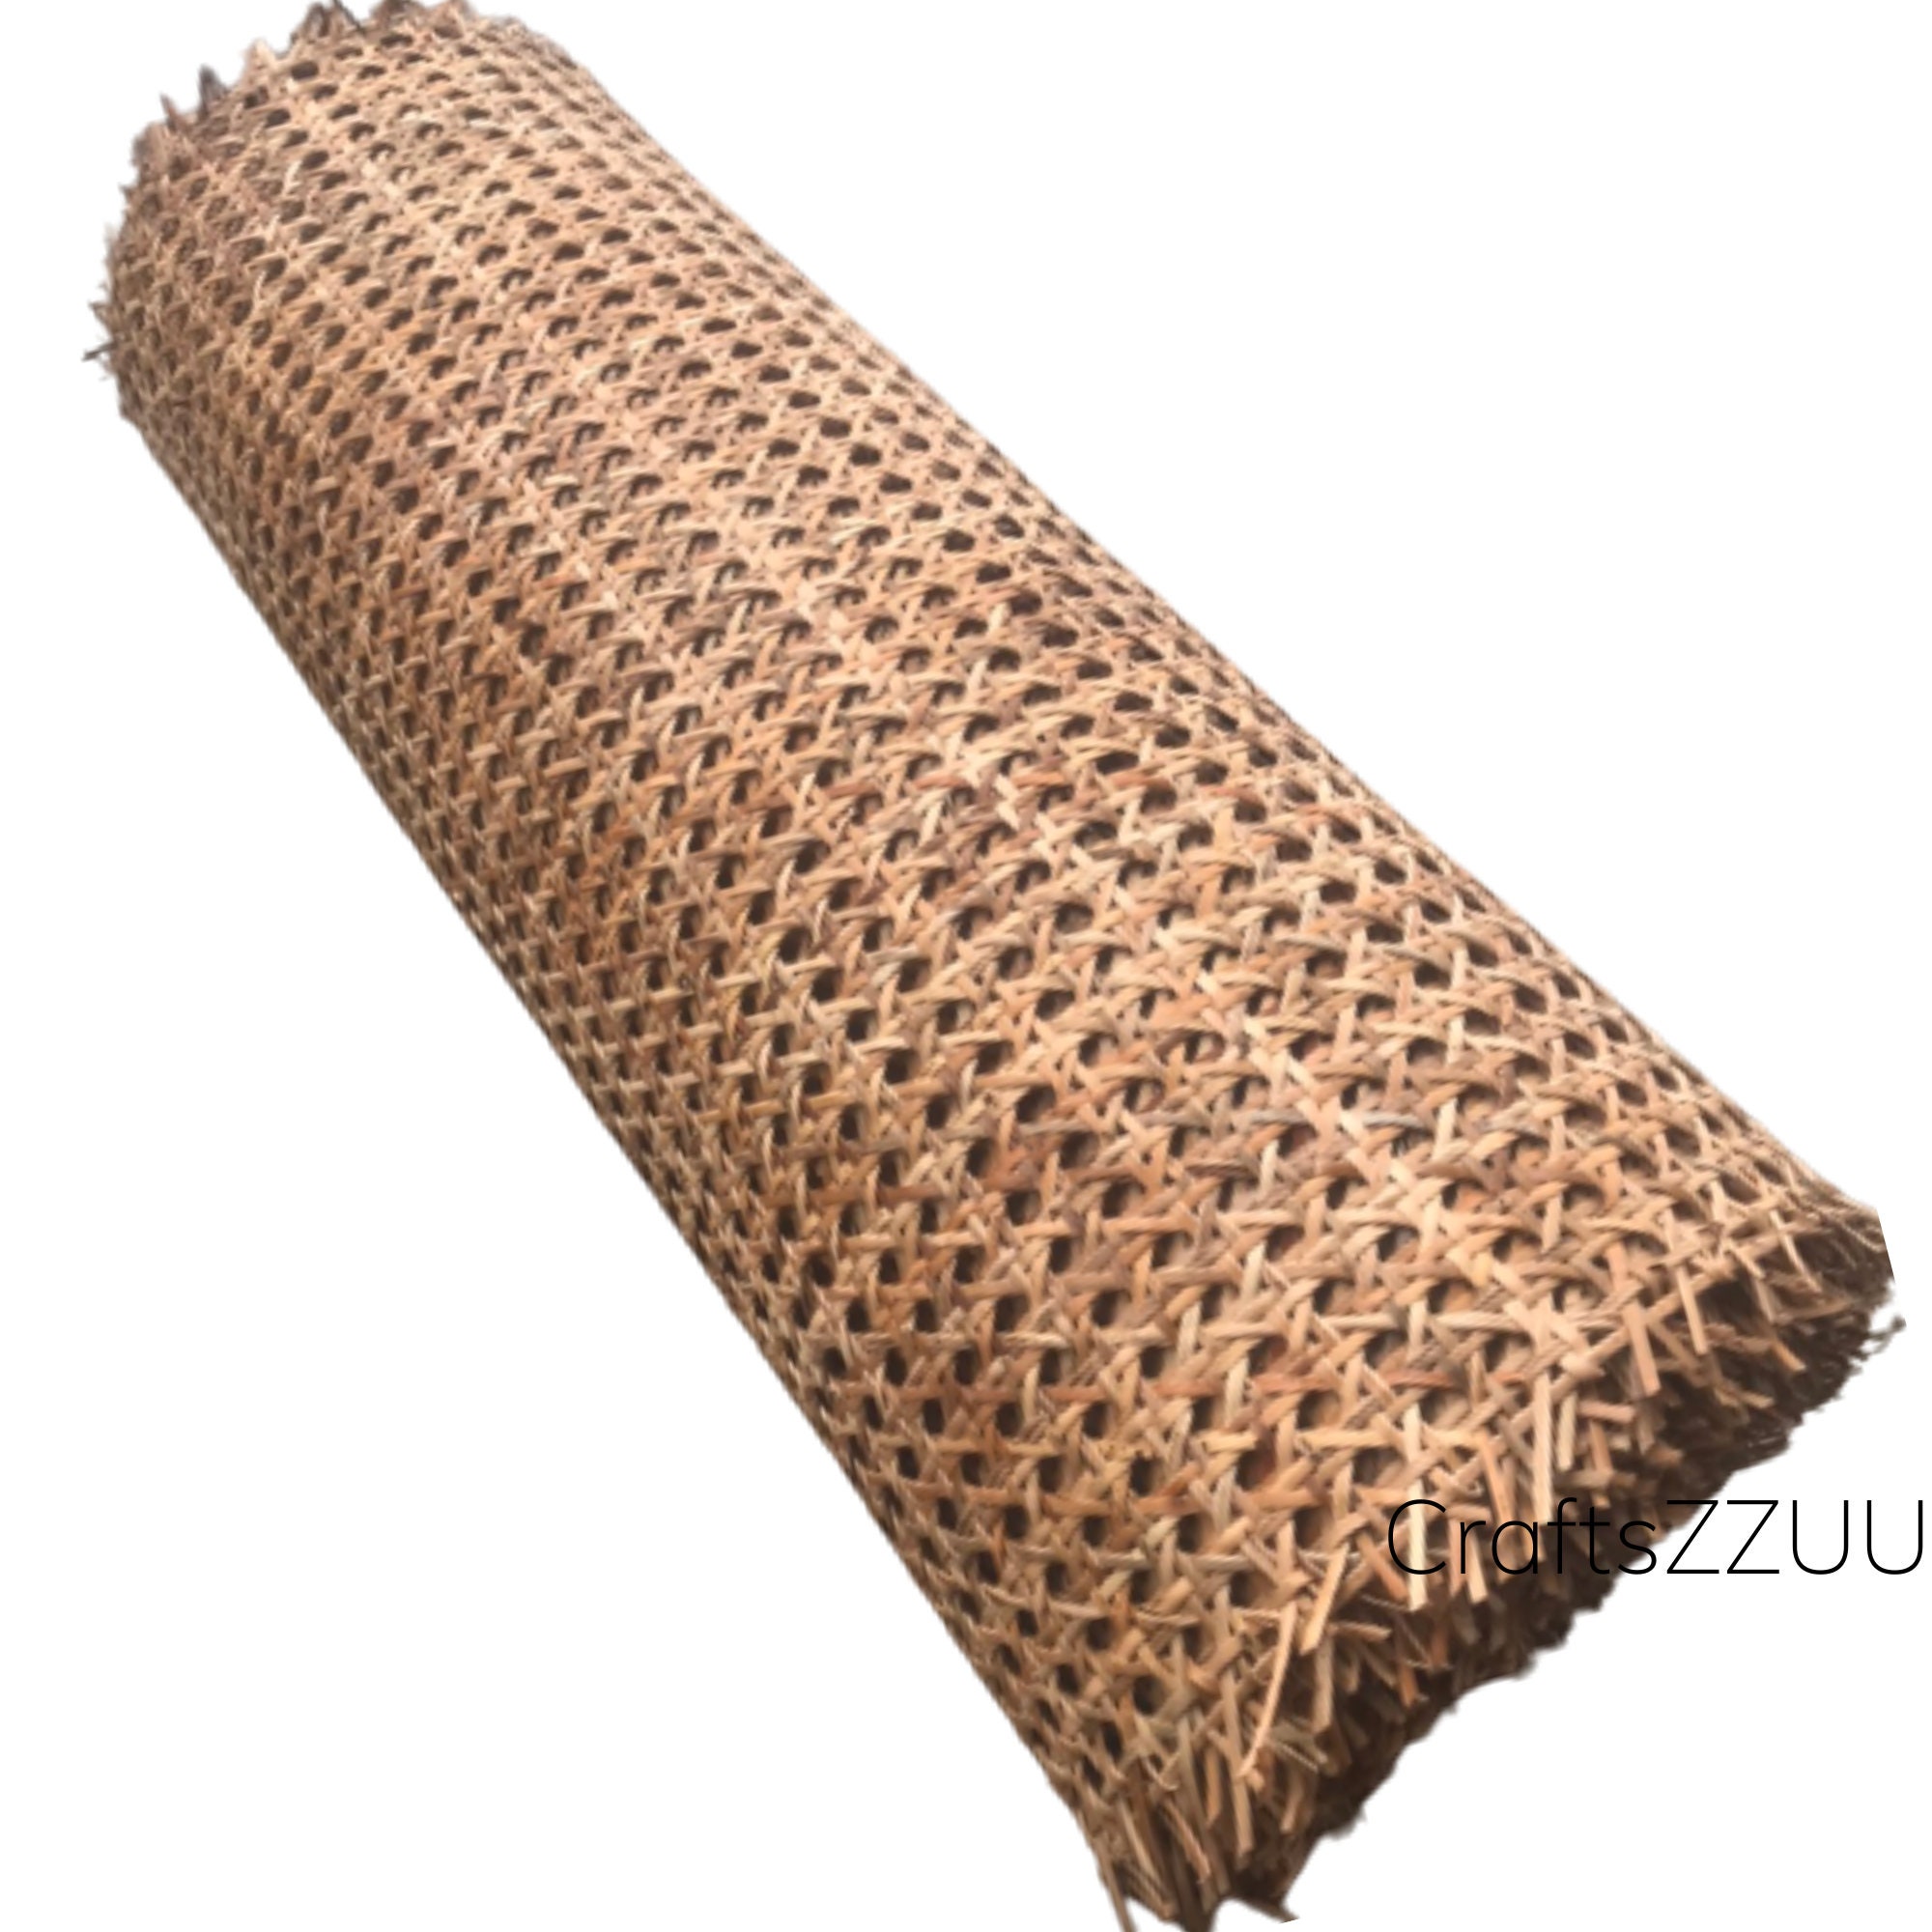 Discount Trends 24” Wide Natural Rattan Webbing Roll for Caning Projects - Woven Open Mesh for Caning Chair - Rattan Hexagon Cane Webbing - 24 x 36